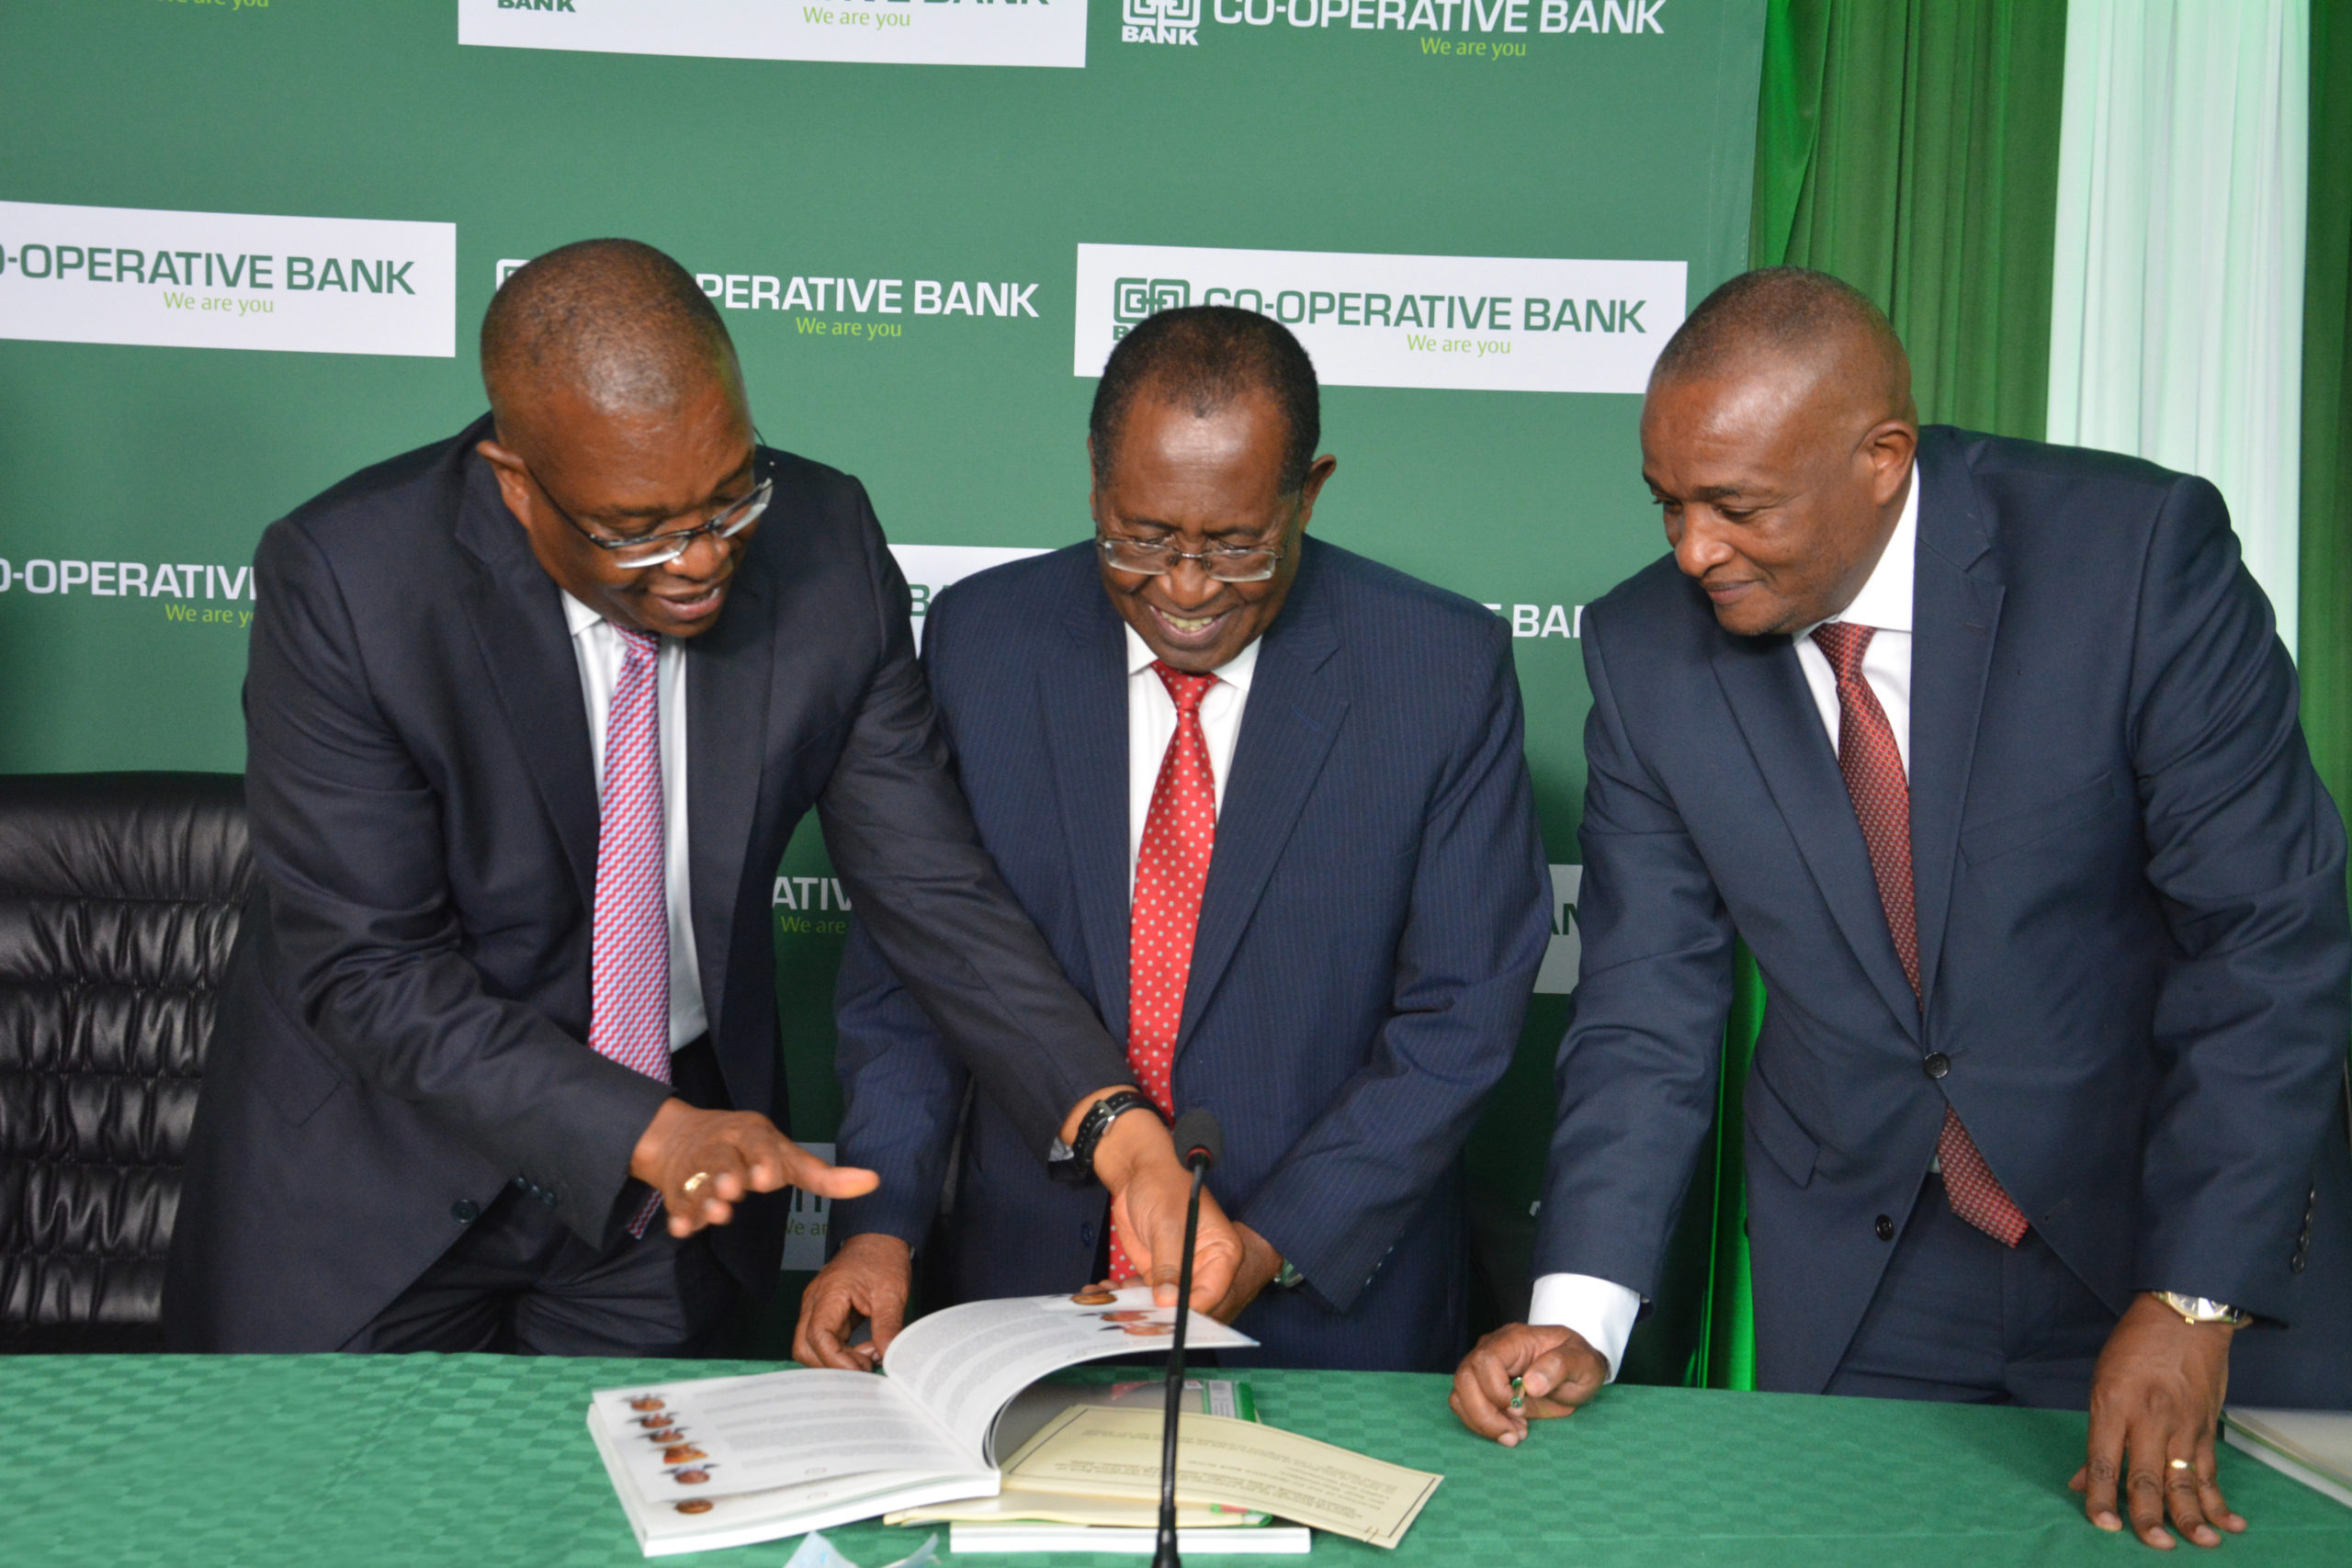 Co-op bank AGM ratifies KSh5.9 billion dividend payout and the acquisition of 90 per cent equity stake in Jamii Bora (Kingdom Bank)